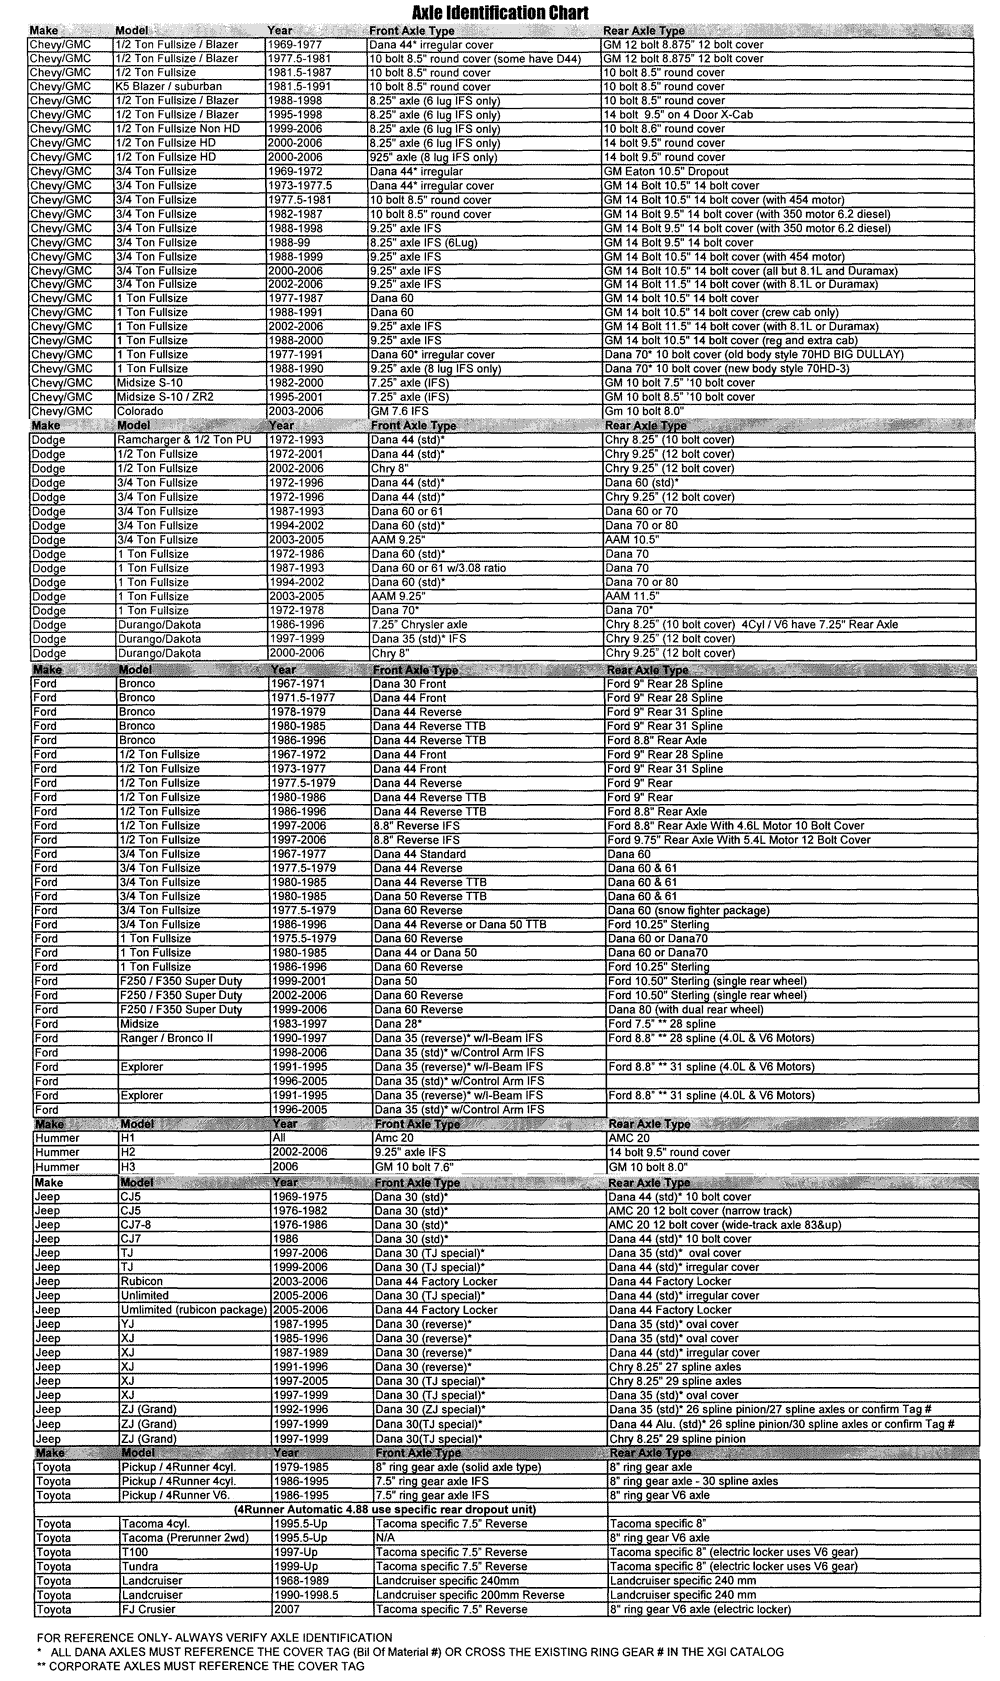 Ford axle id chart #2